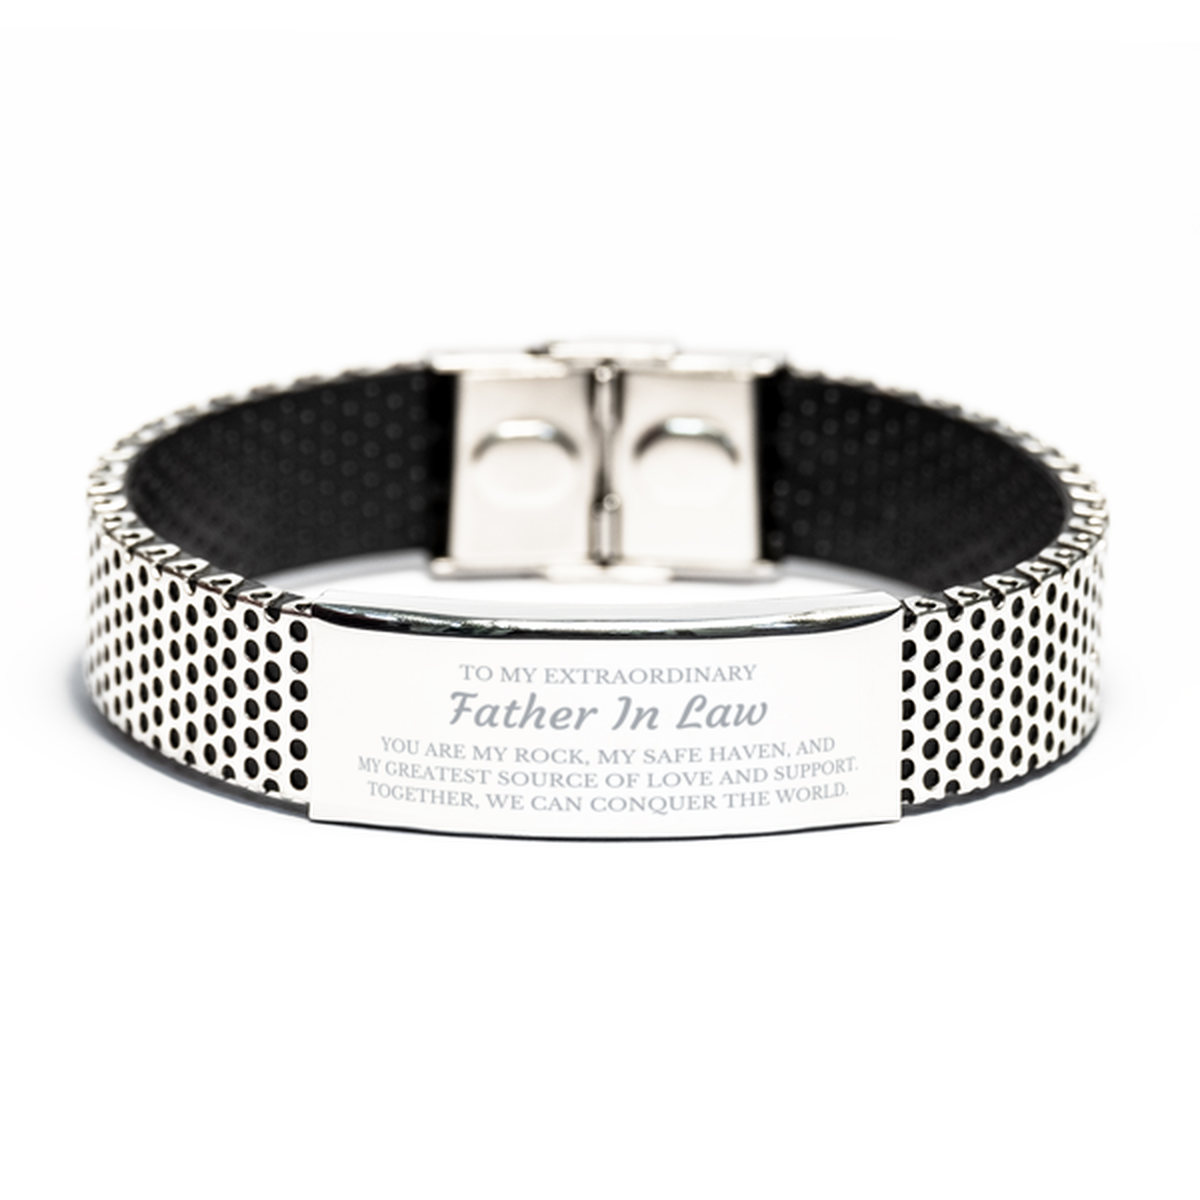 To My Extraordinary Father In Law Gifts, Together, we can conquer the world, Birthday Stainless Steel Bracelet For Father In Law, Christmas Gifts For Father In Law